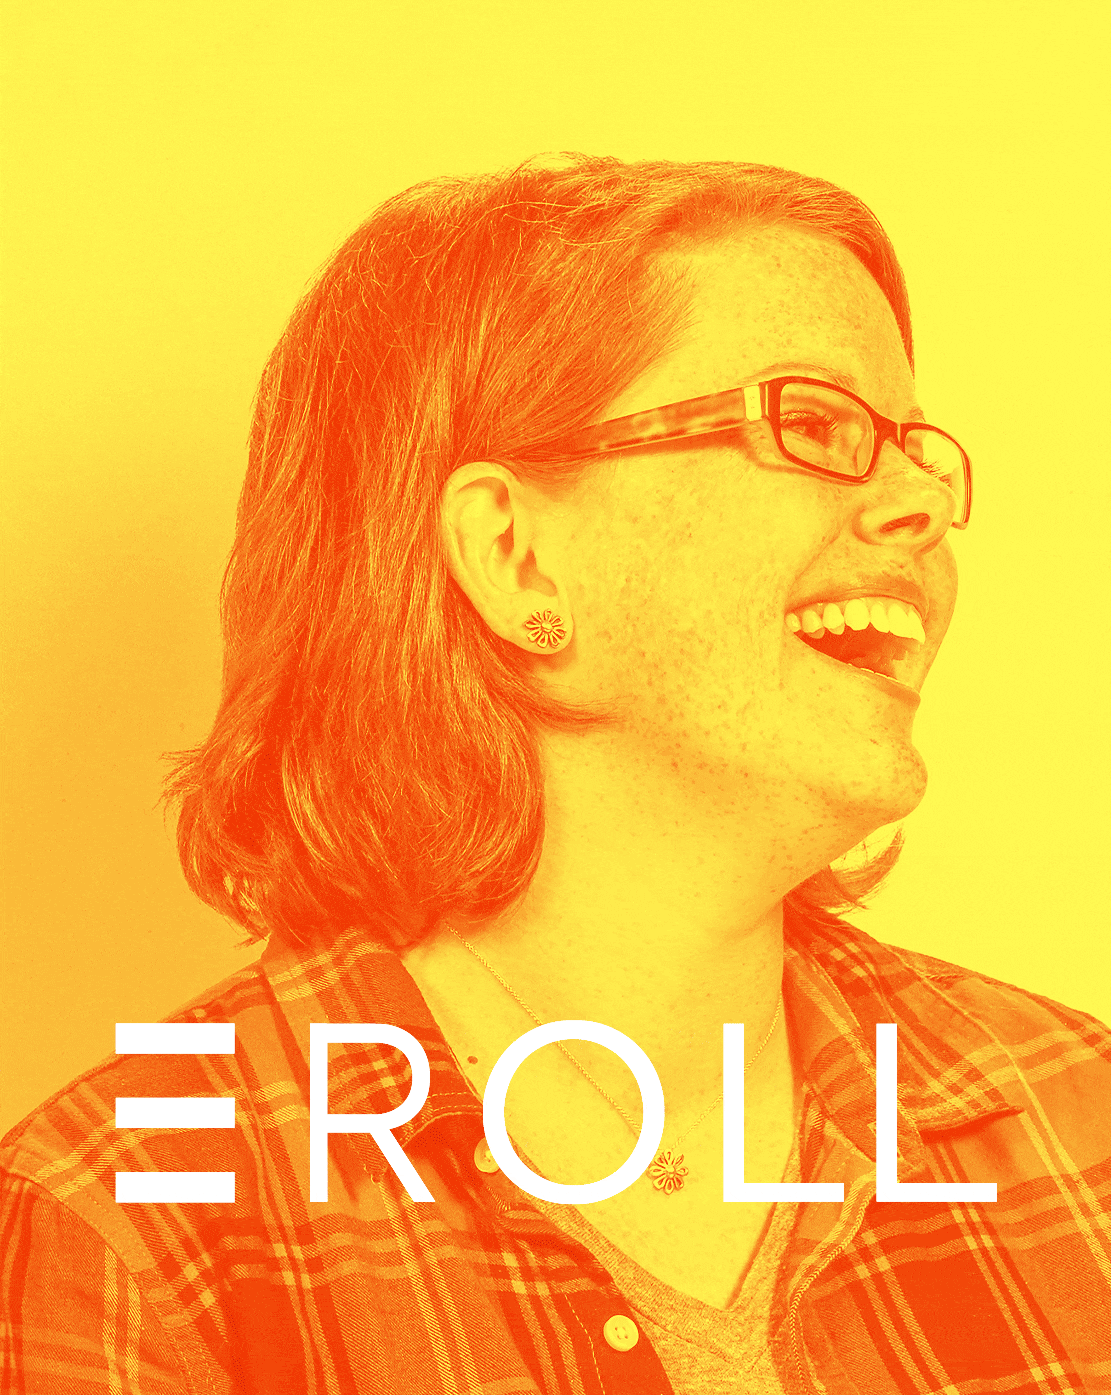 EPIC EROLL | Erin Anderson, Vice President of Project Management, EPIC Creative